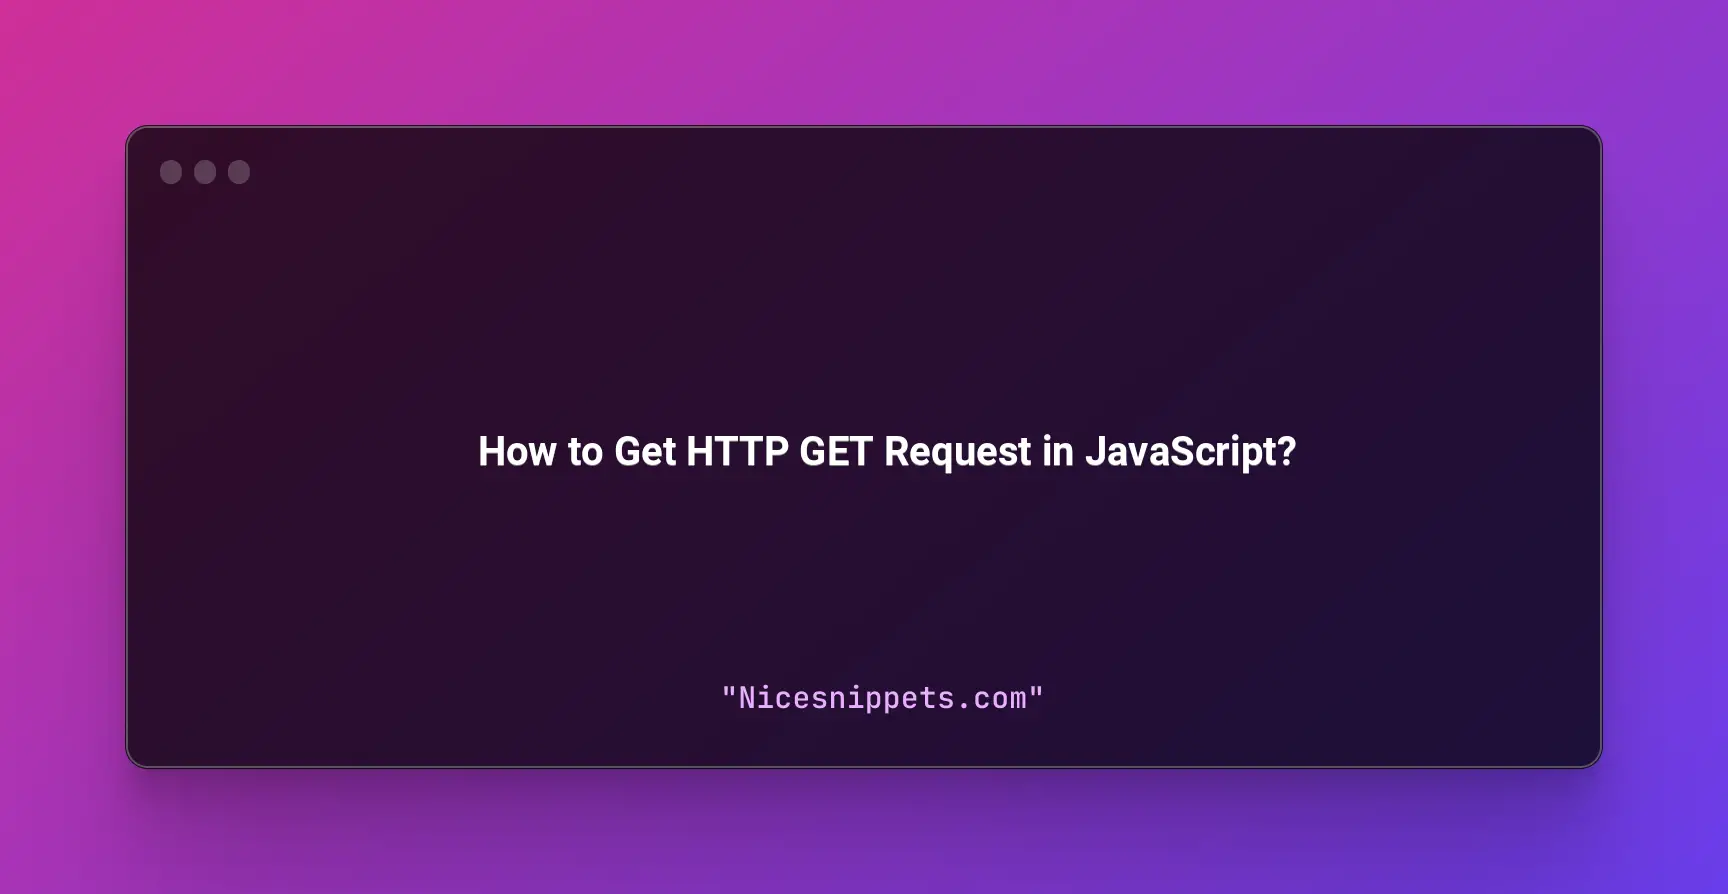 How to Get HTTP GET Request in JavaScript?